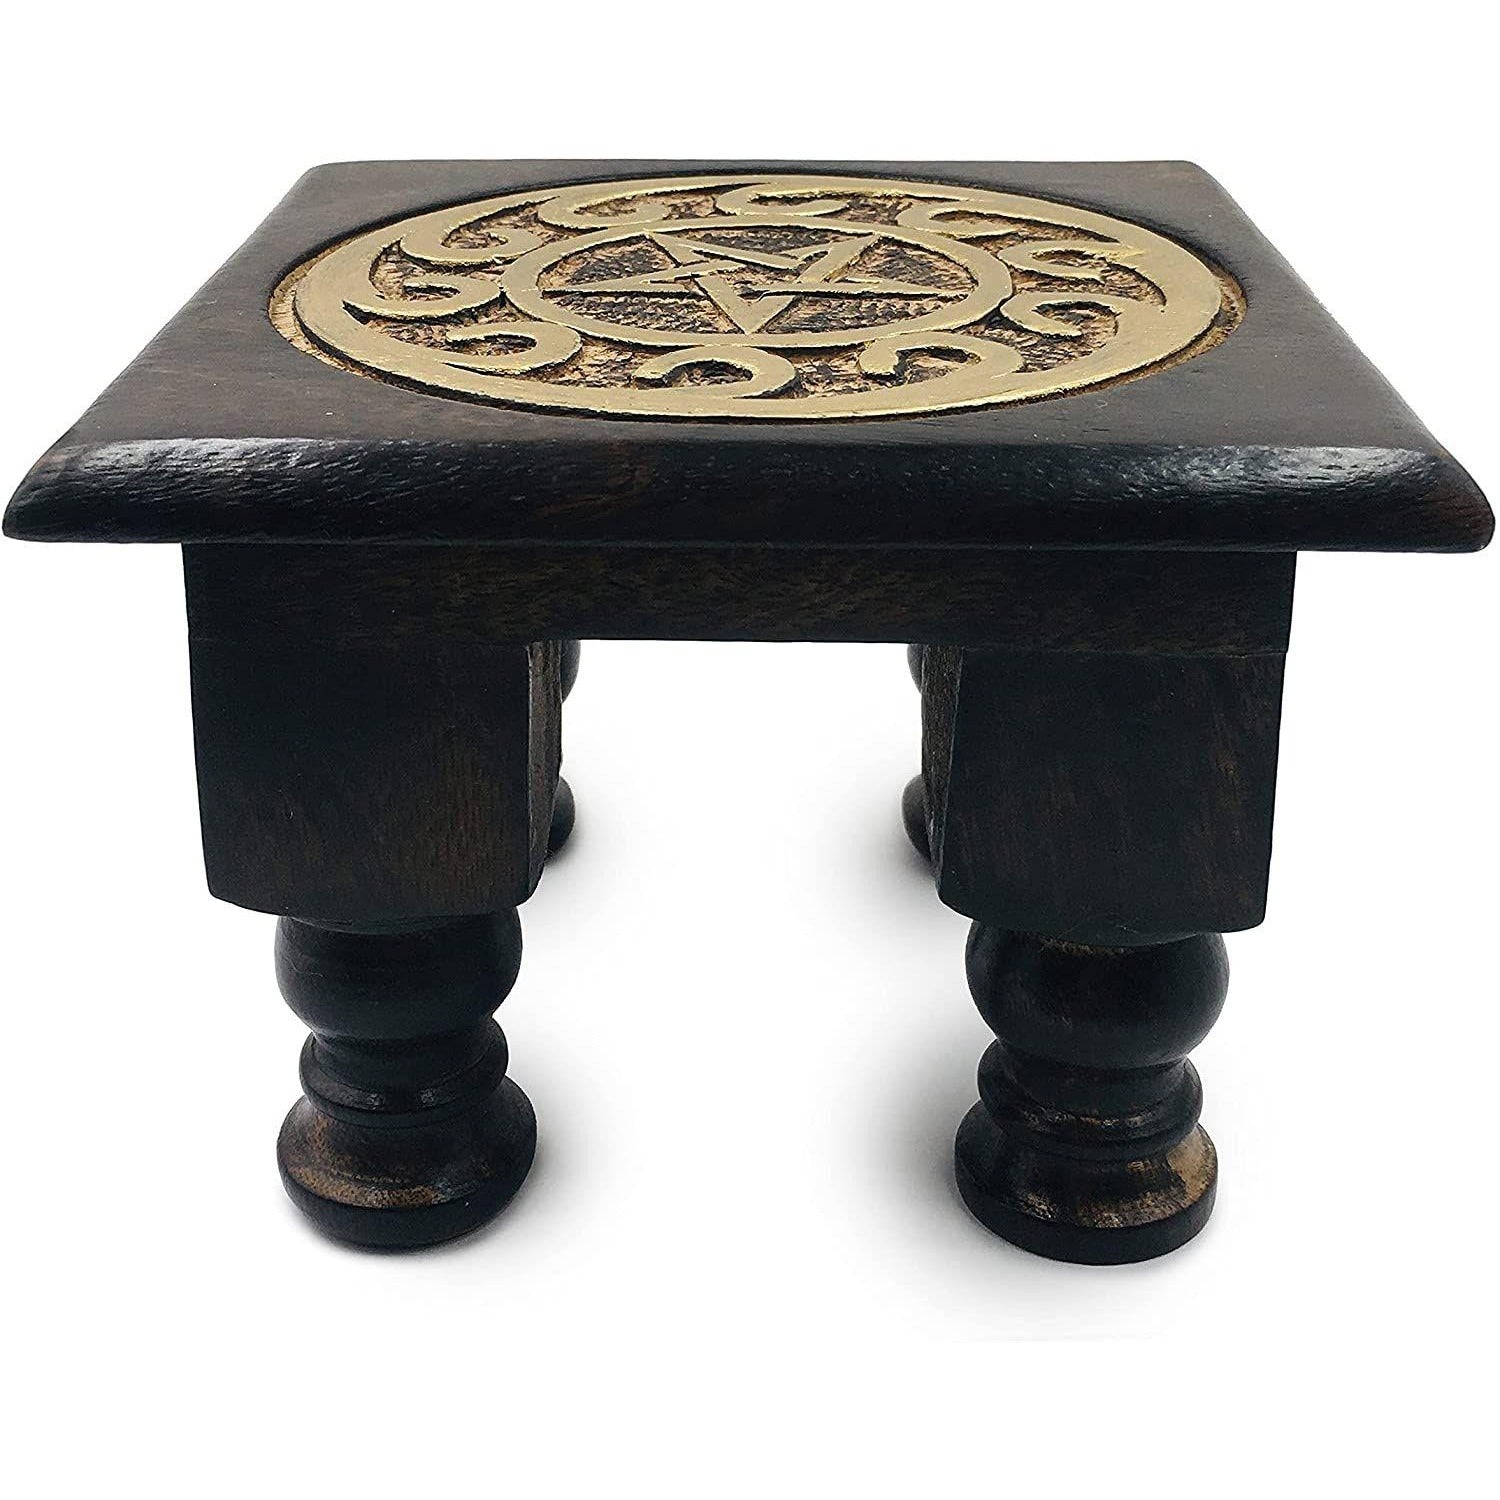 Carved Wooden Pentagram Altar Table Painted Black with Gold Design 6 Inches Wide 4 Inches Tall